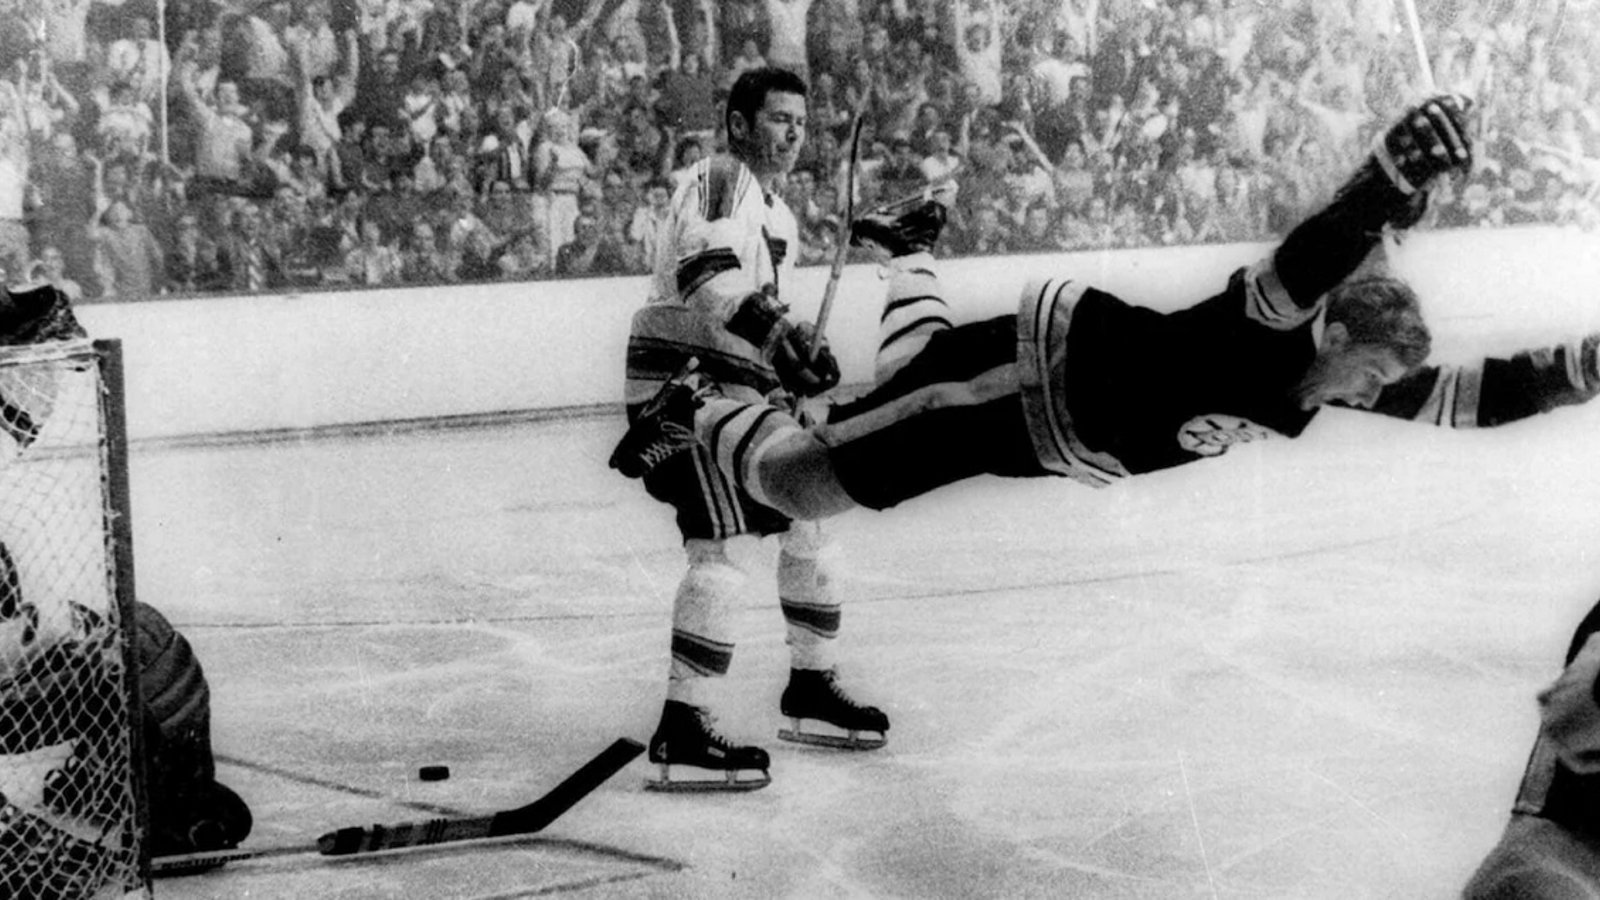 50 years ago today: Bobby Orr scores one of the most iconic goals in NHL history.